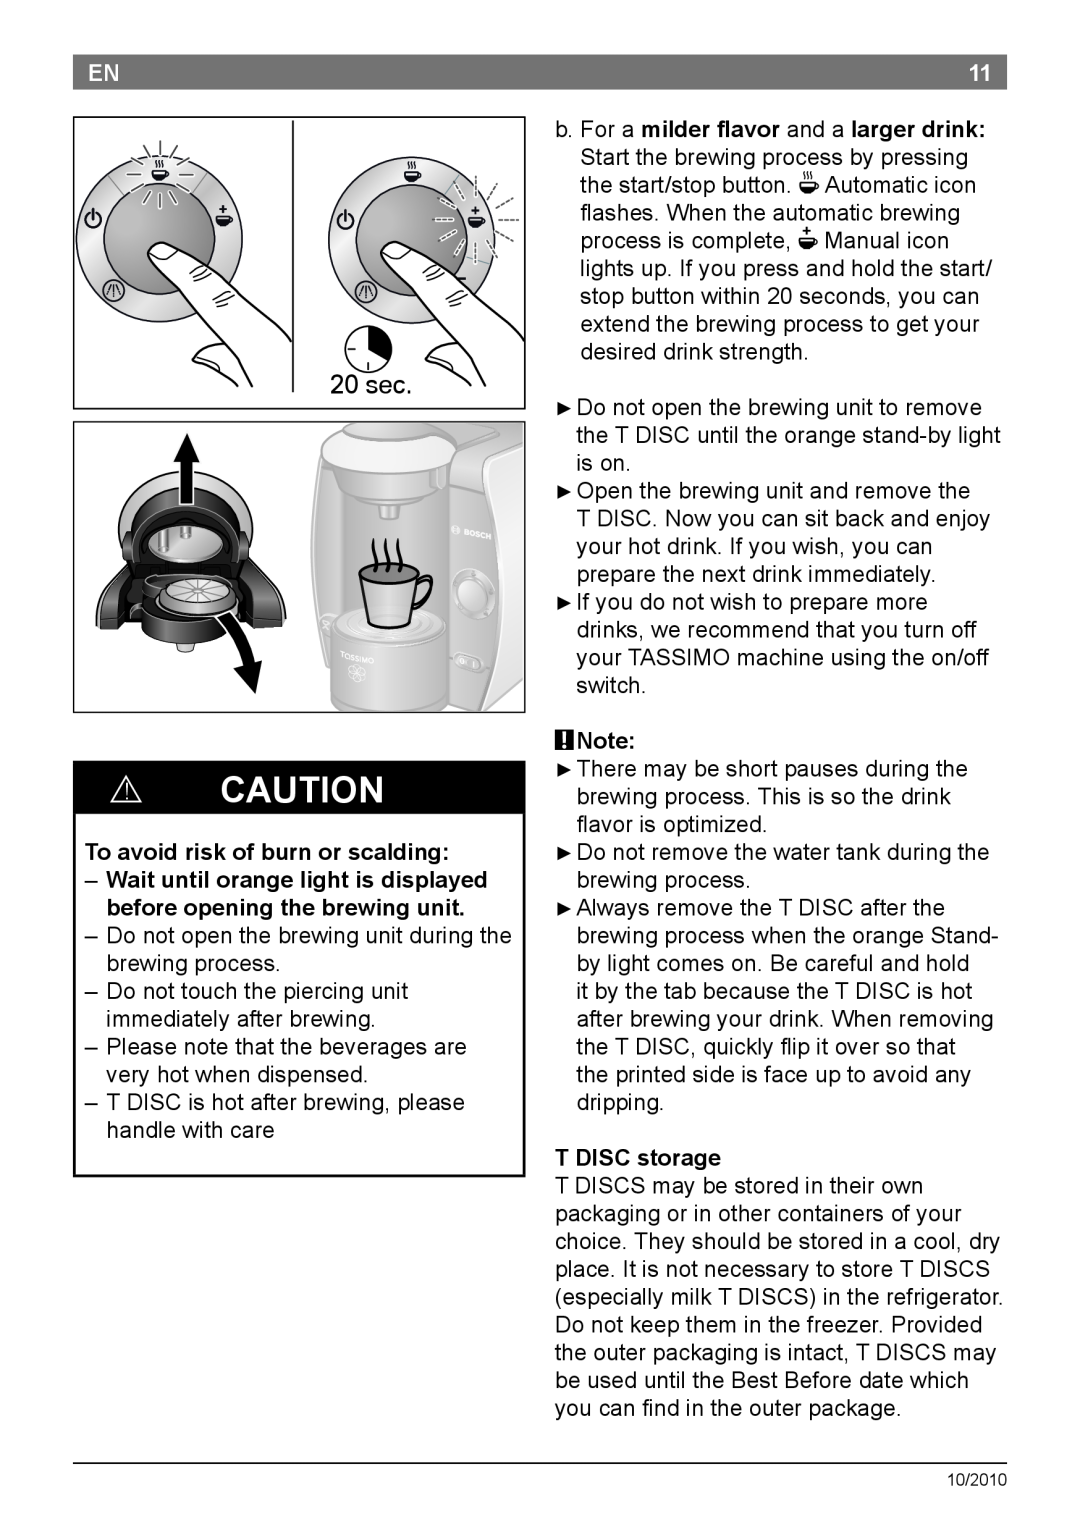 Bosch Appliances T45 instruction manual 20 sec, To avoid risk of burn or scalding, T DISC storage 